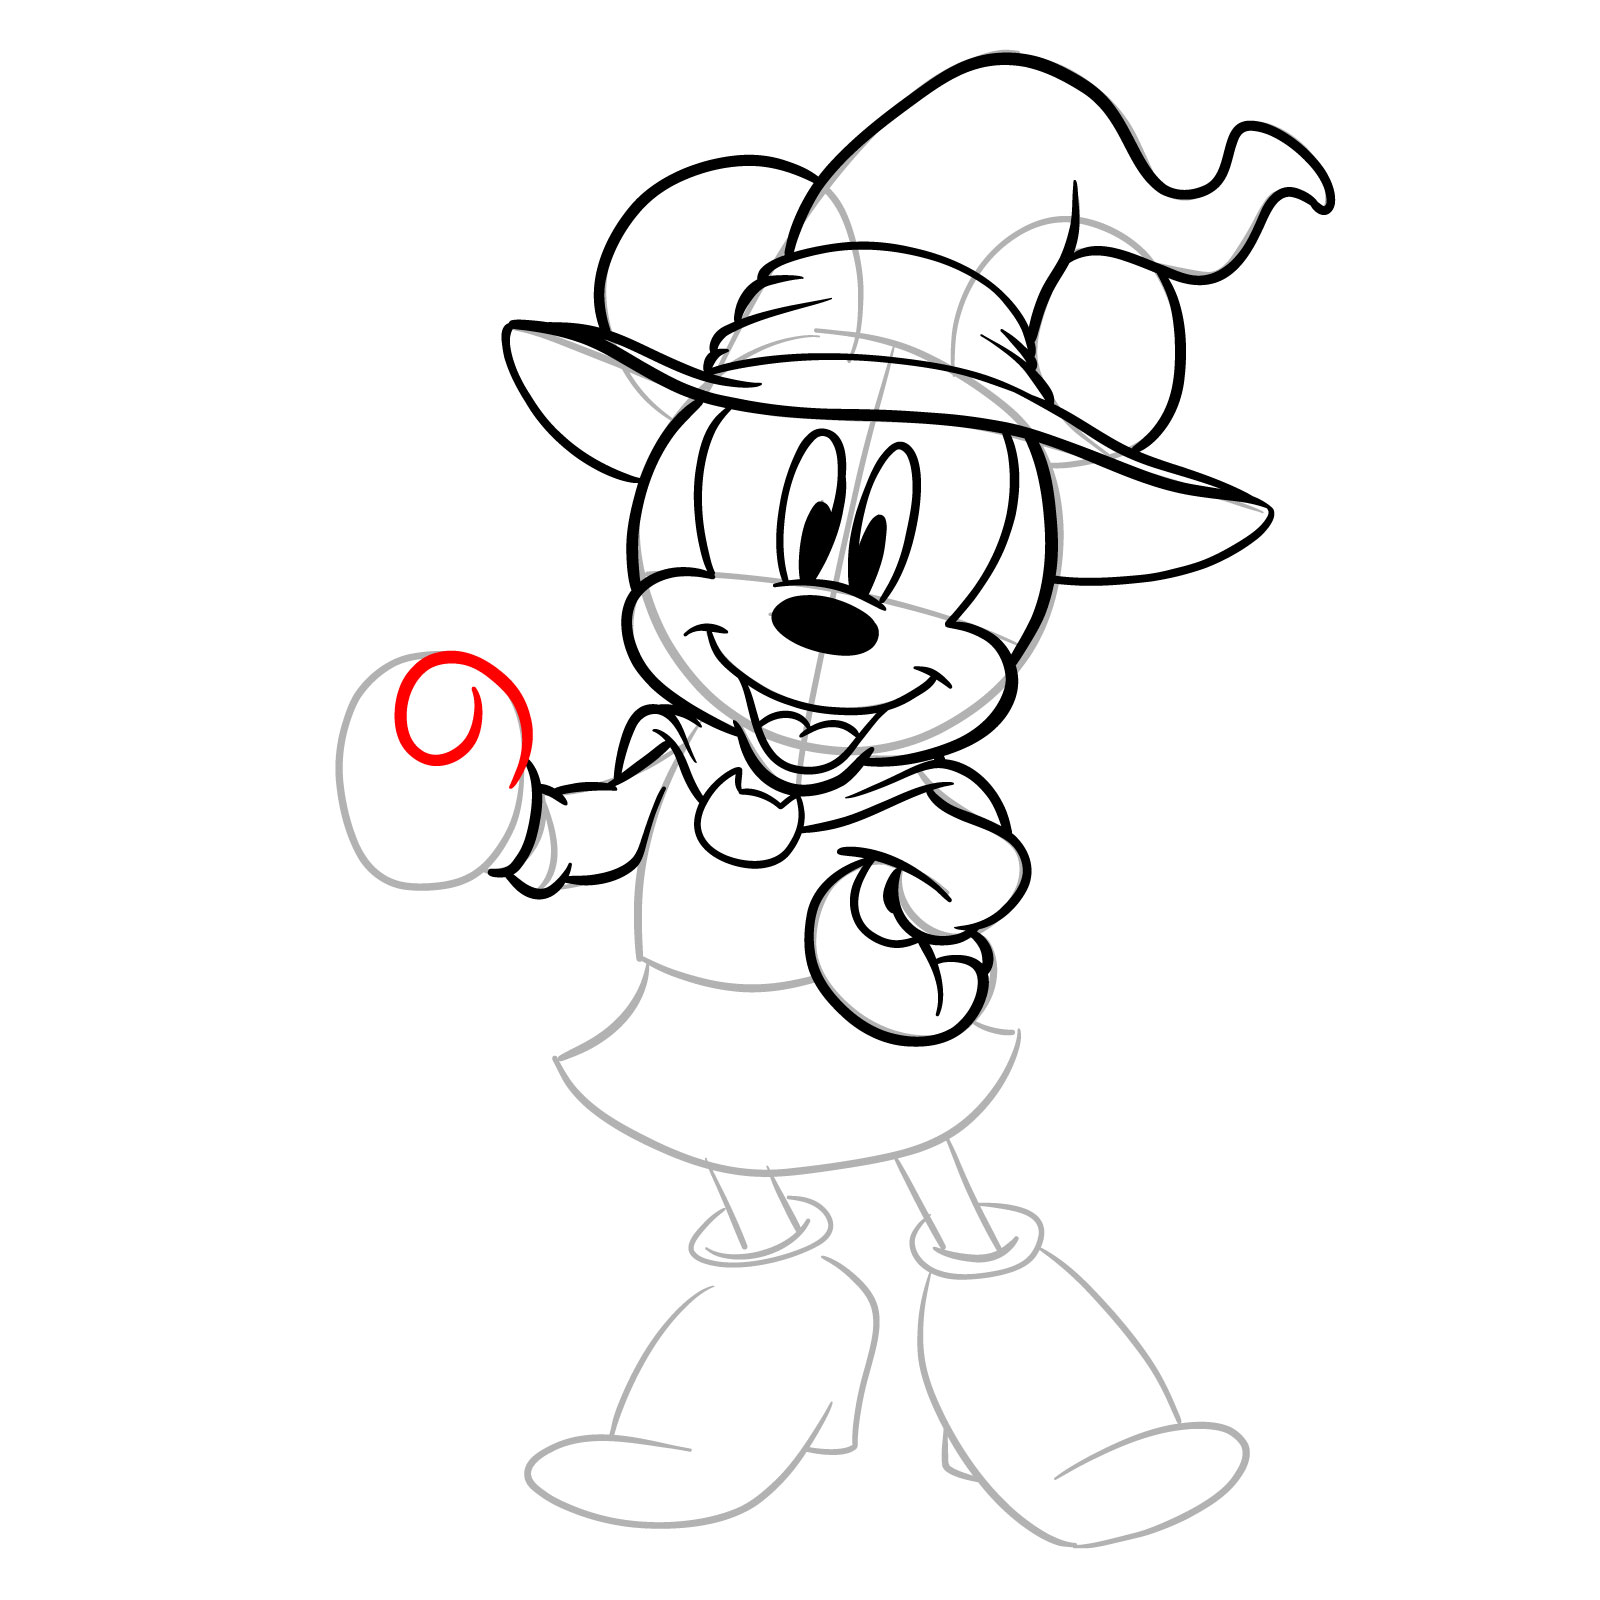 How to draw Halloween Minnie Mouse as a witch - step 19